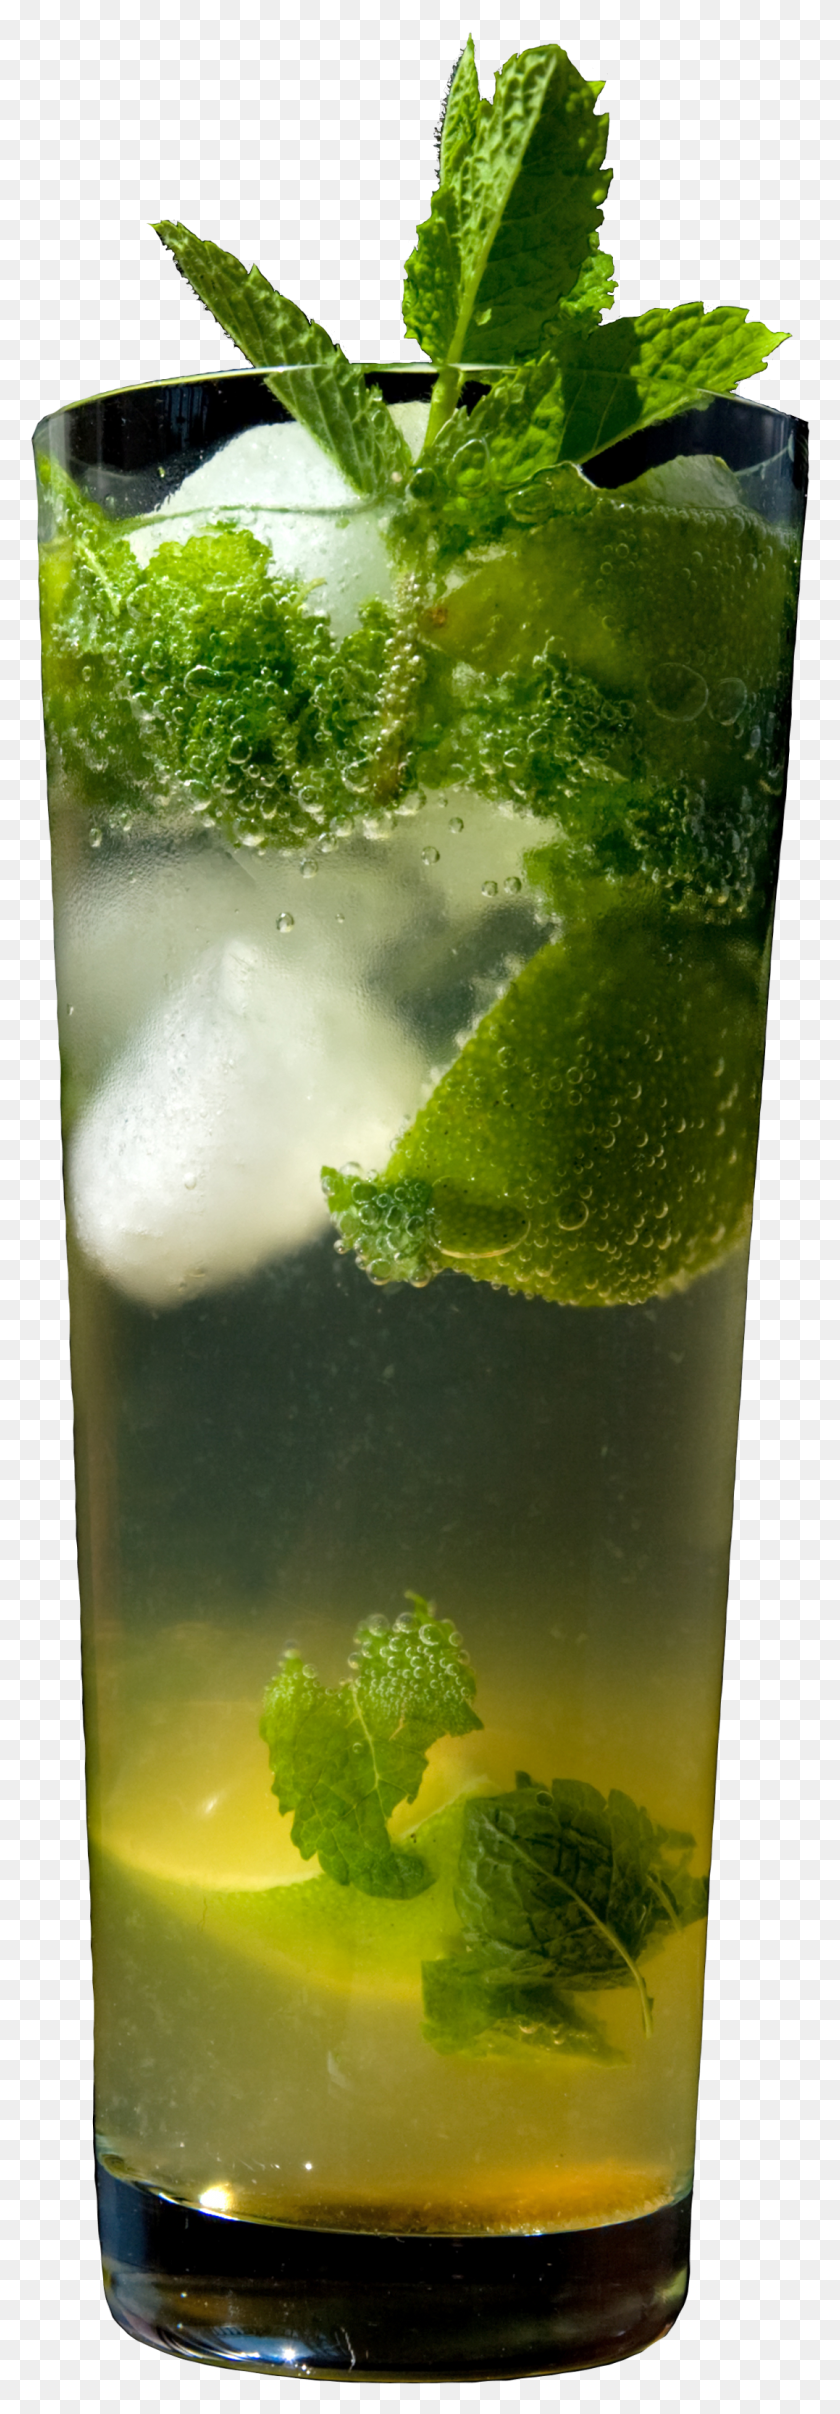 1077x3251 Silver Rum Mojito Cocktail Passion Hd Png